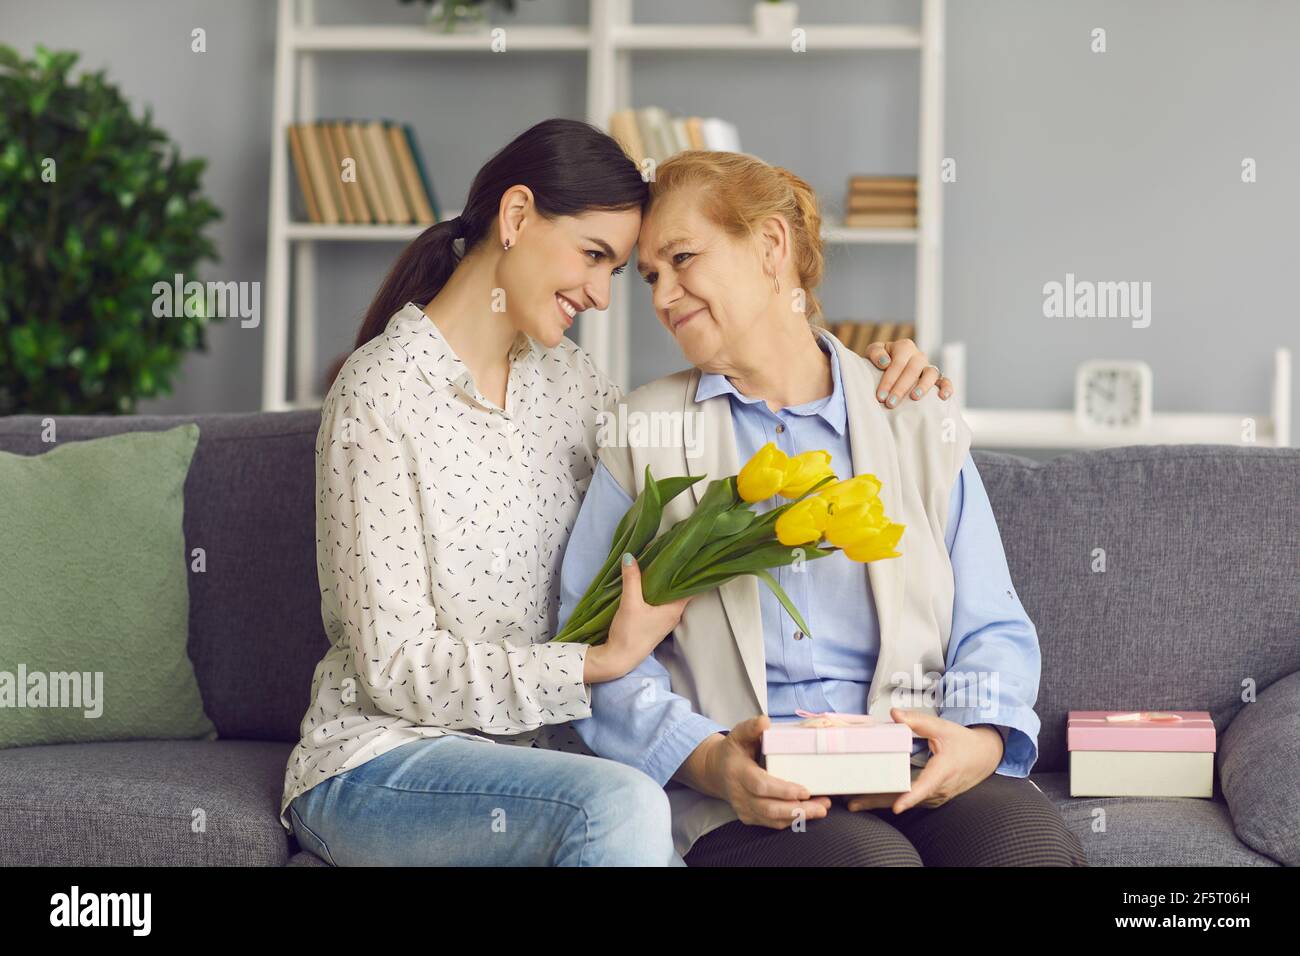 Loving daughter hugs and gives flowers and gifts to her mature mother in honor of Mother's Day. Stock Photo